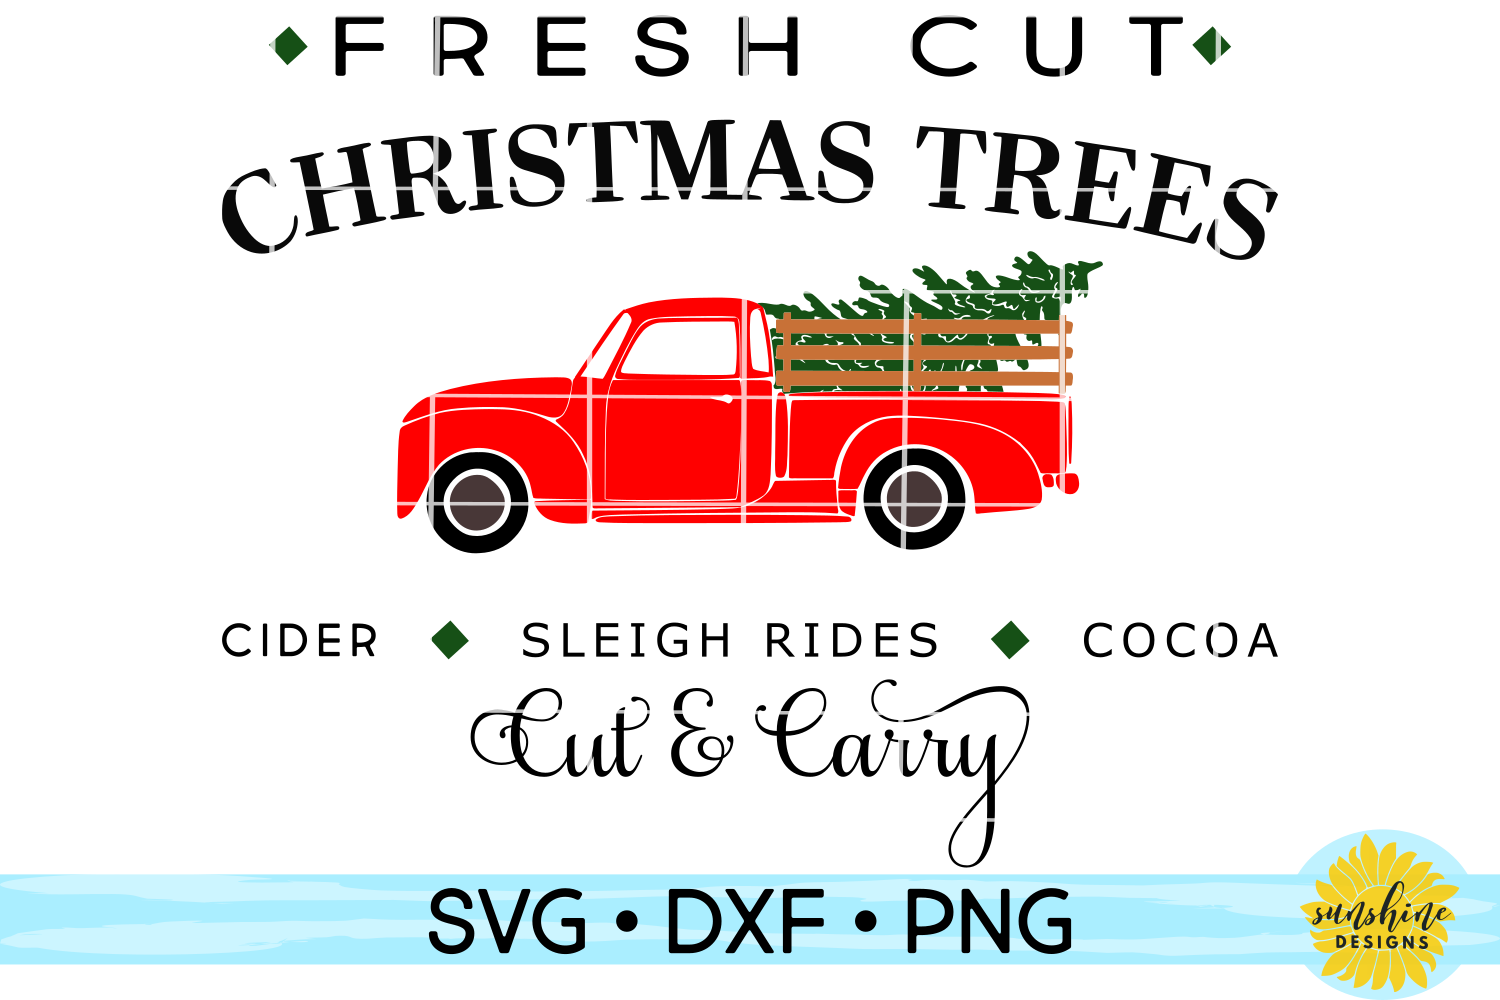 FRESH CUT CHRISTMAS TREES | RED TRUCK CHRISTMAS SVG DXF PNG (118544